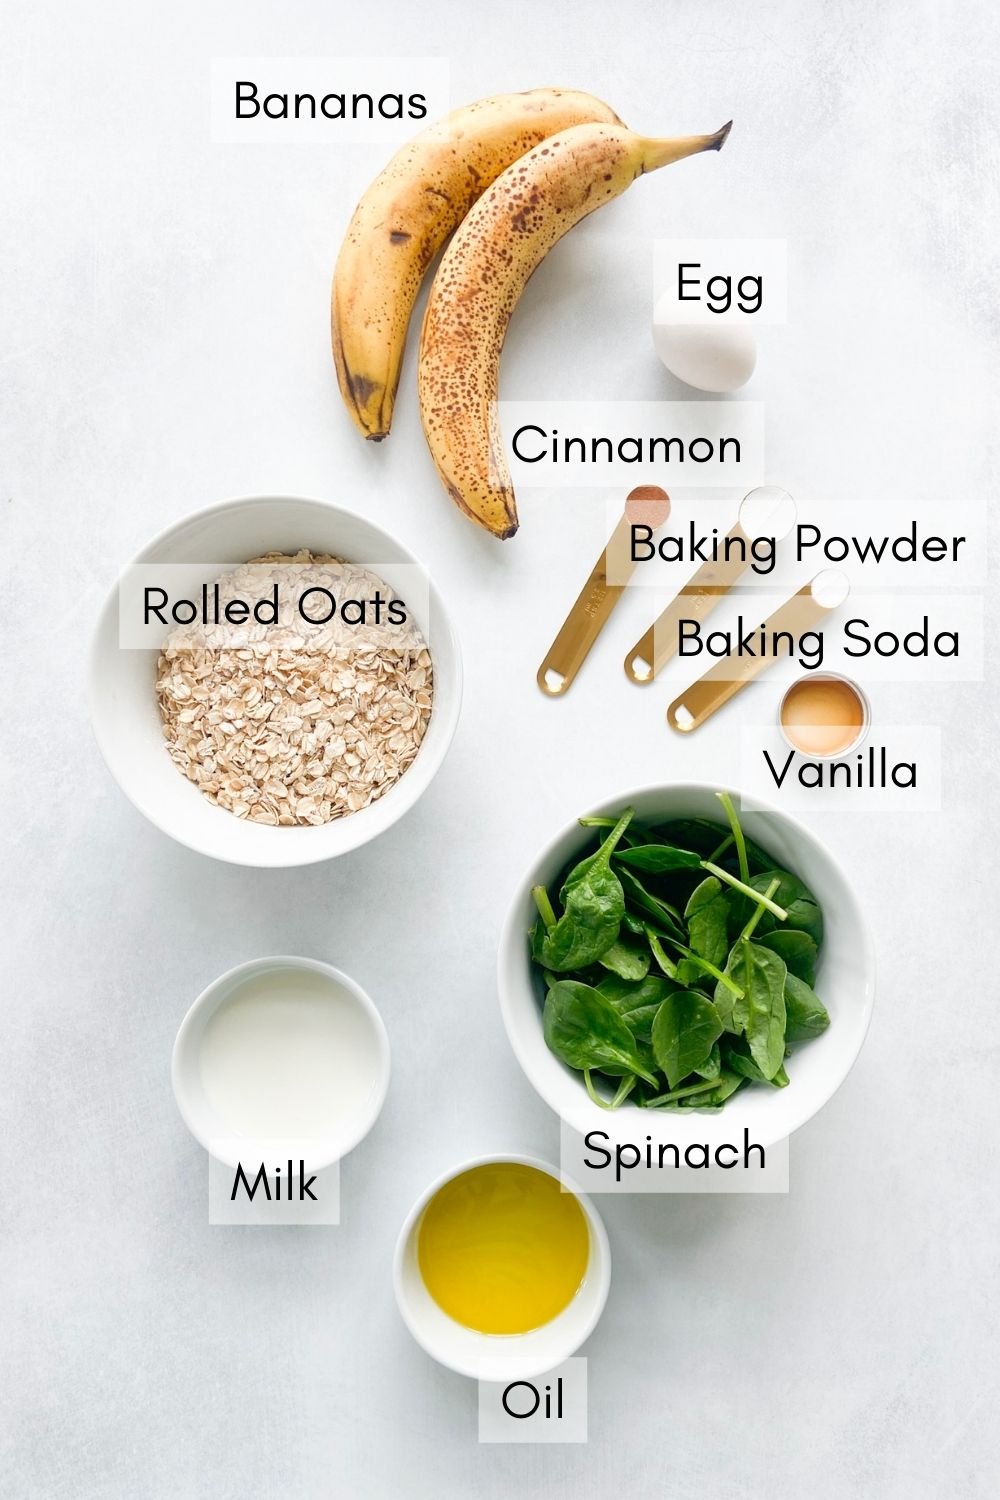 Ingredients to make spinach banana muffins.